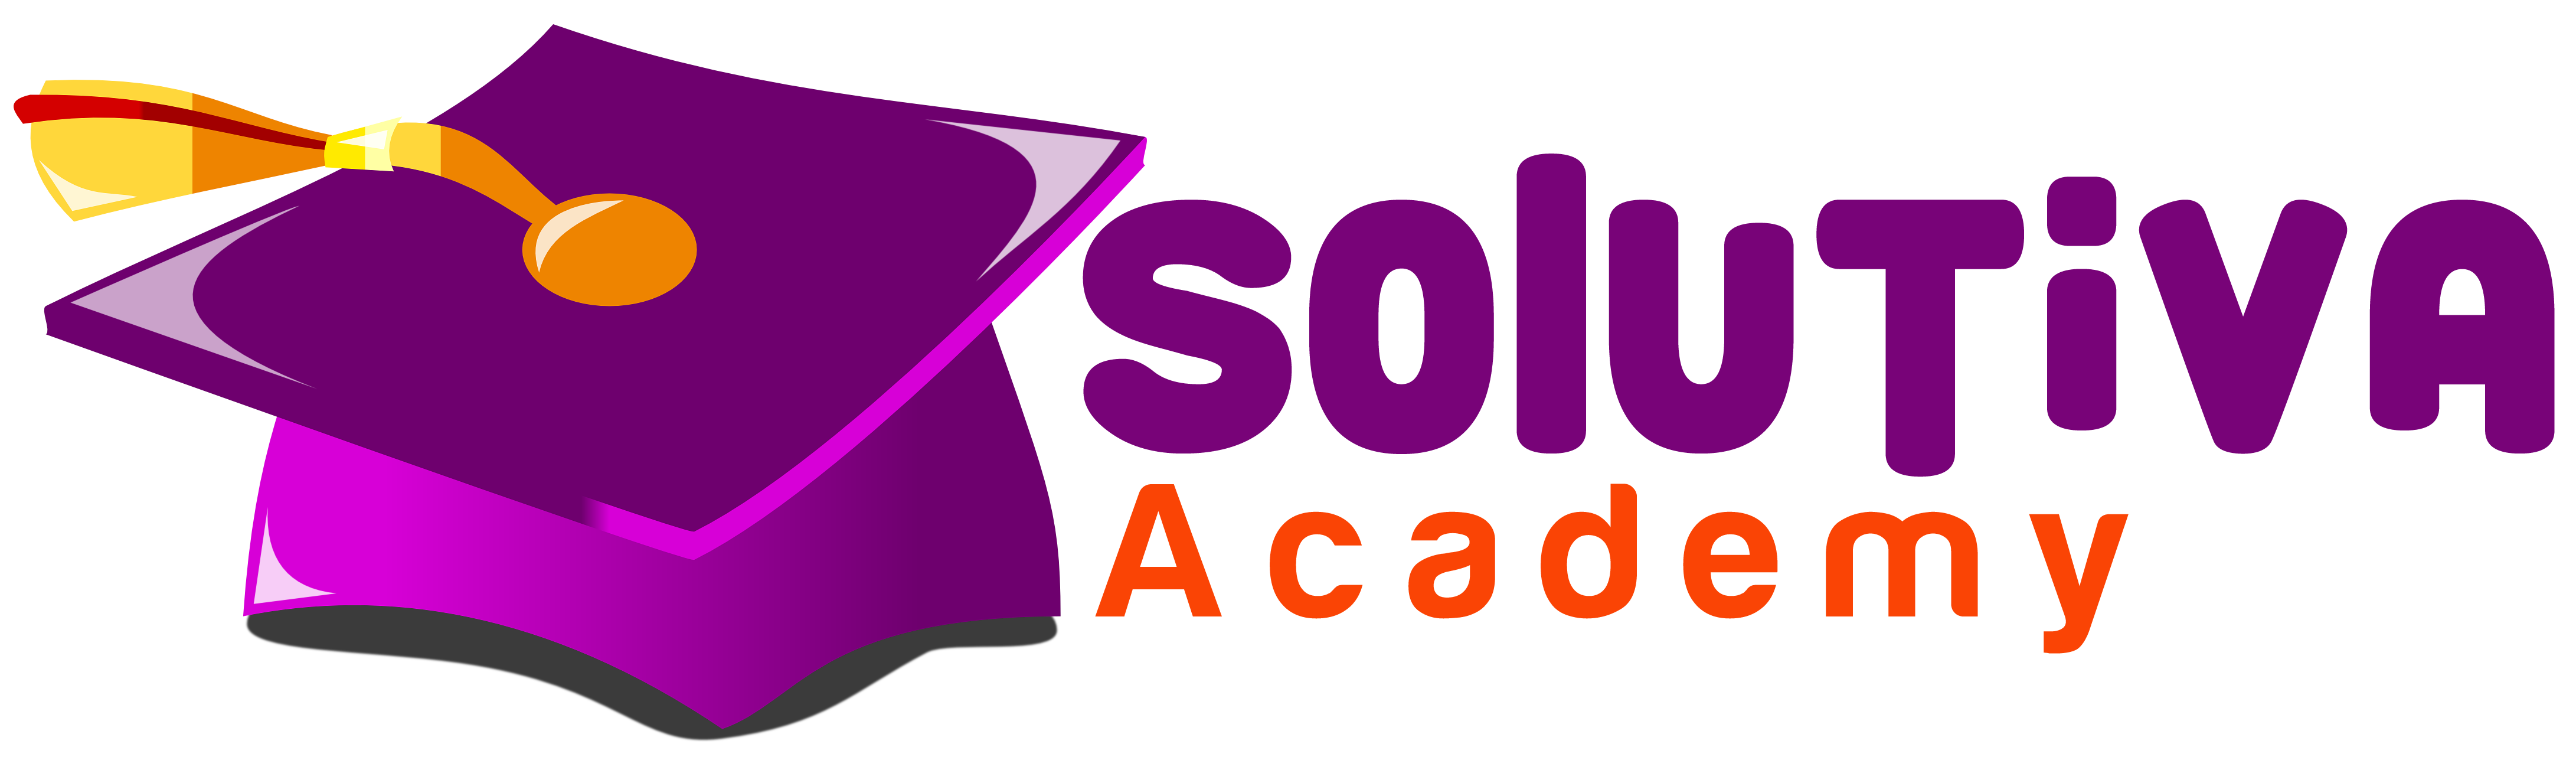 Solutiva Academy by PT Solutiva Consulting Indonesia